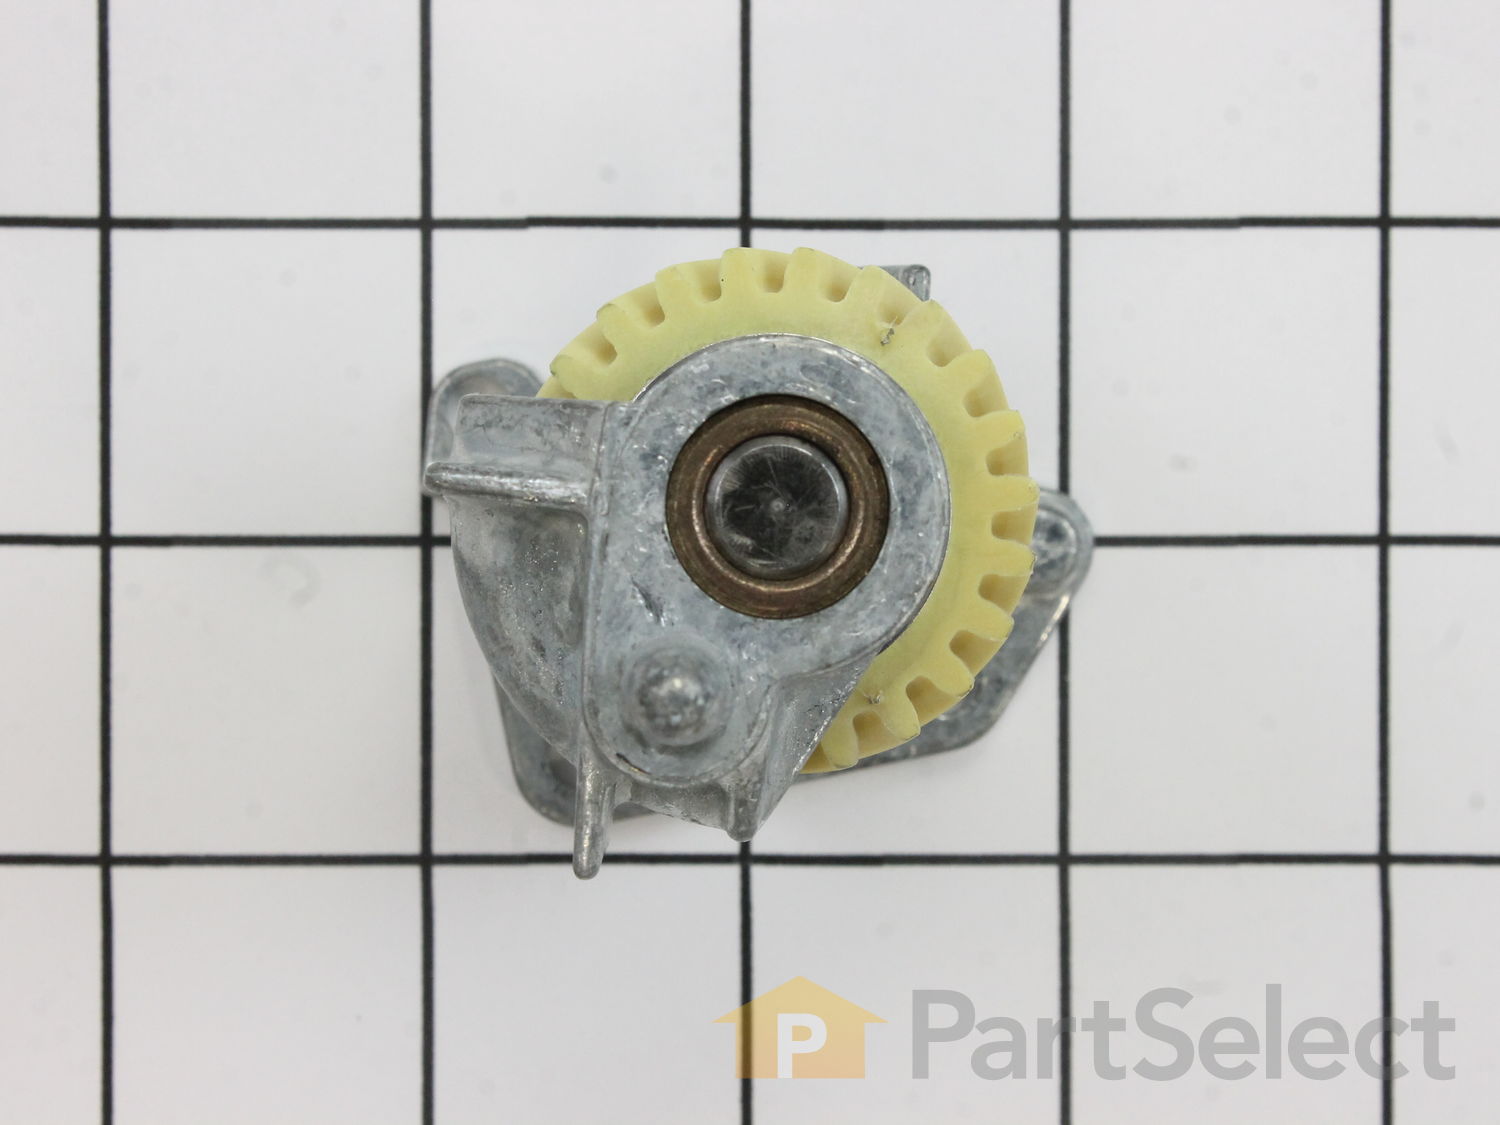 Carbon Brush and Mixer Worm Gear Kit Replacement For Whirlpool